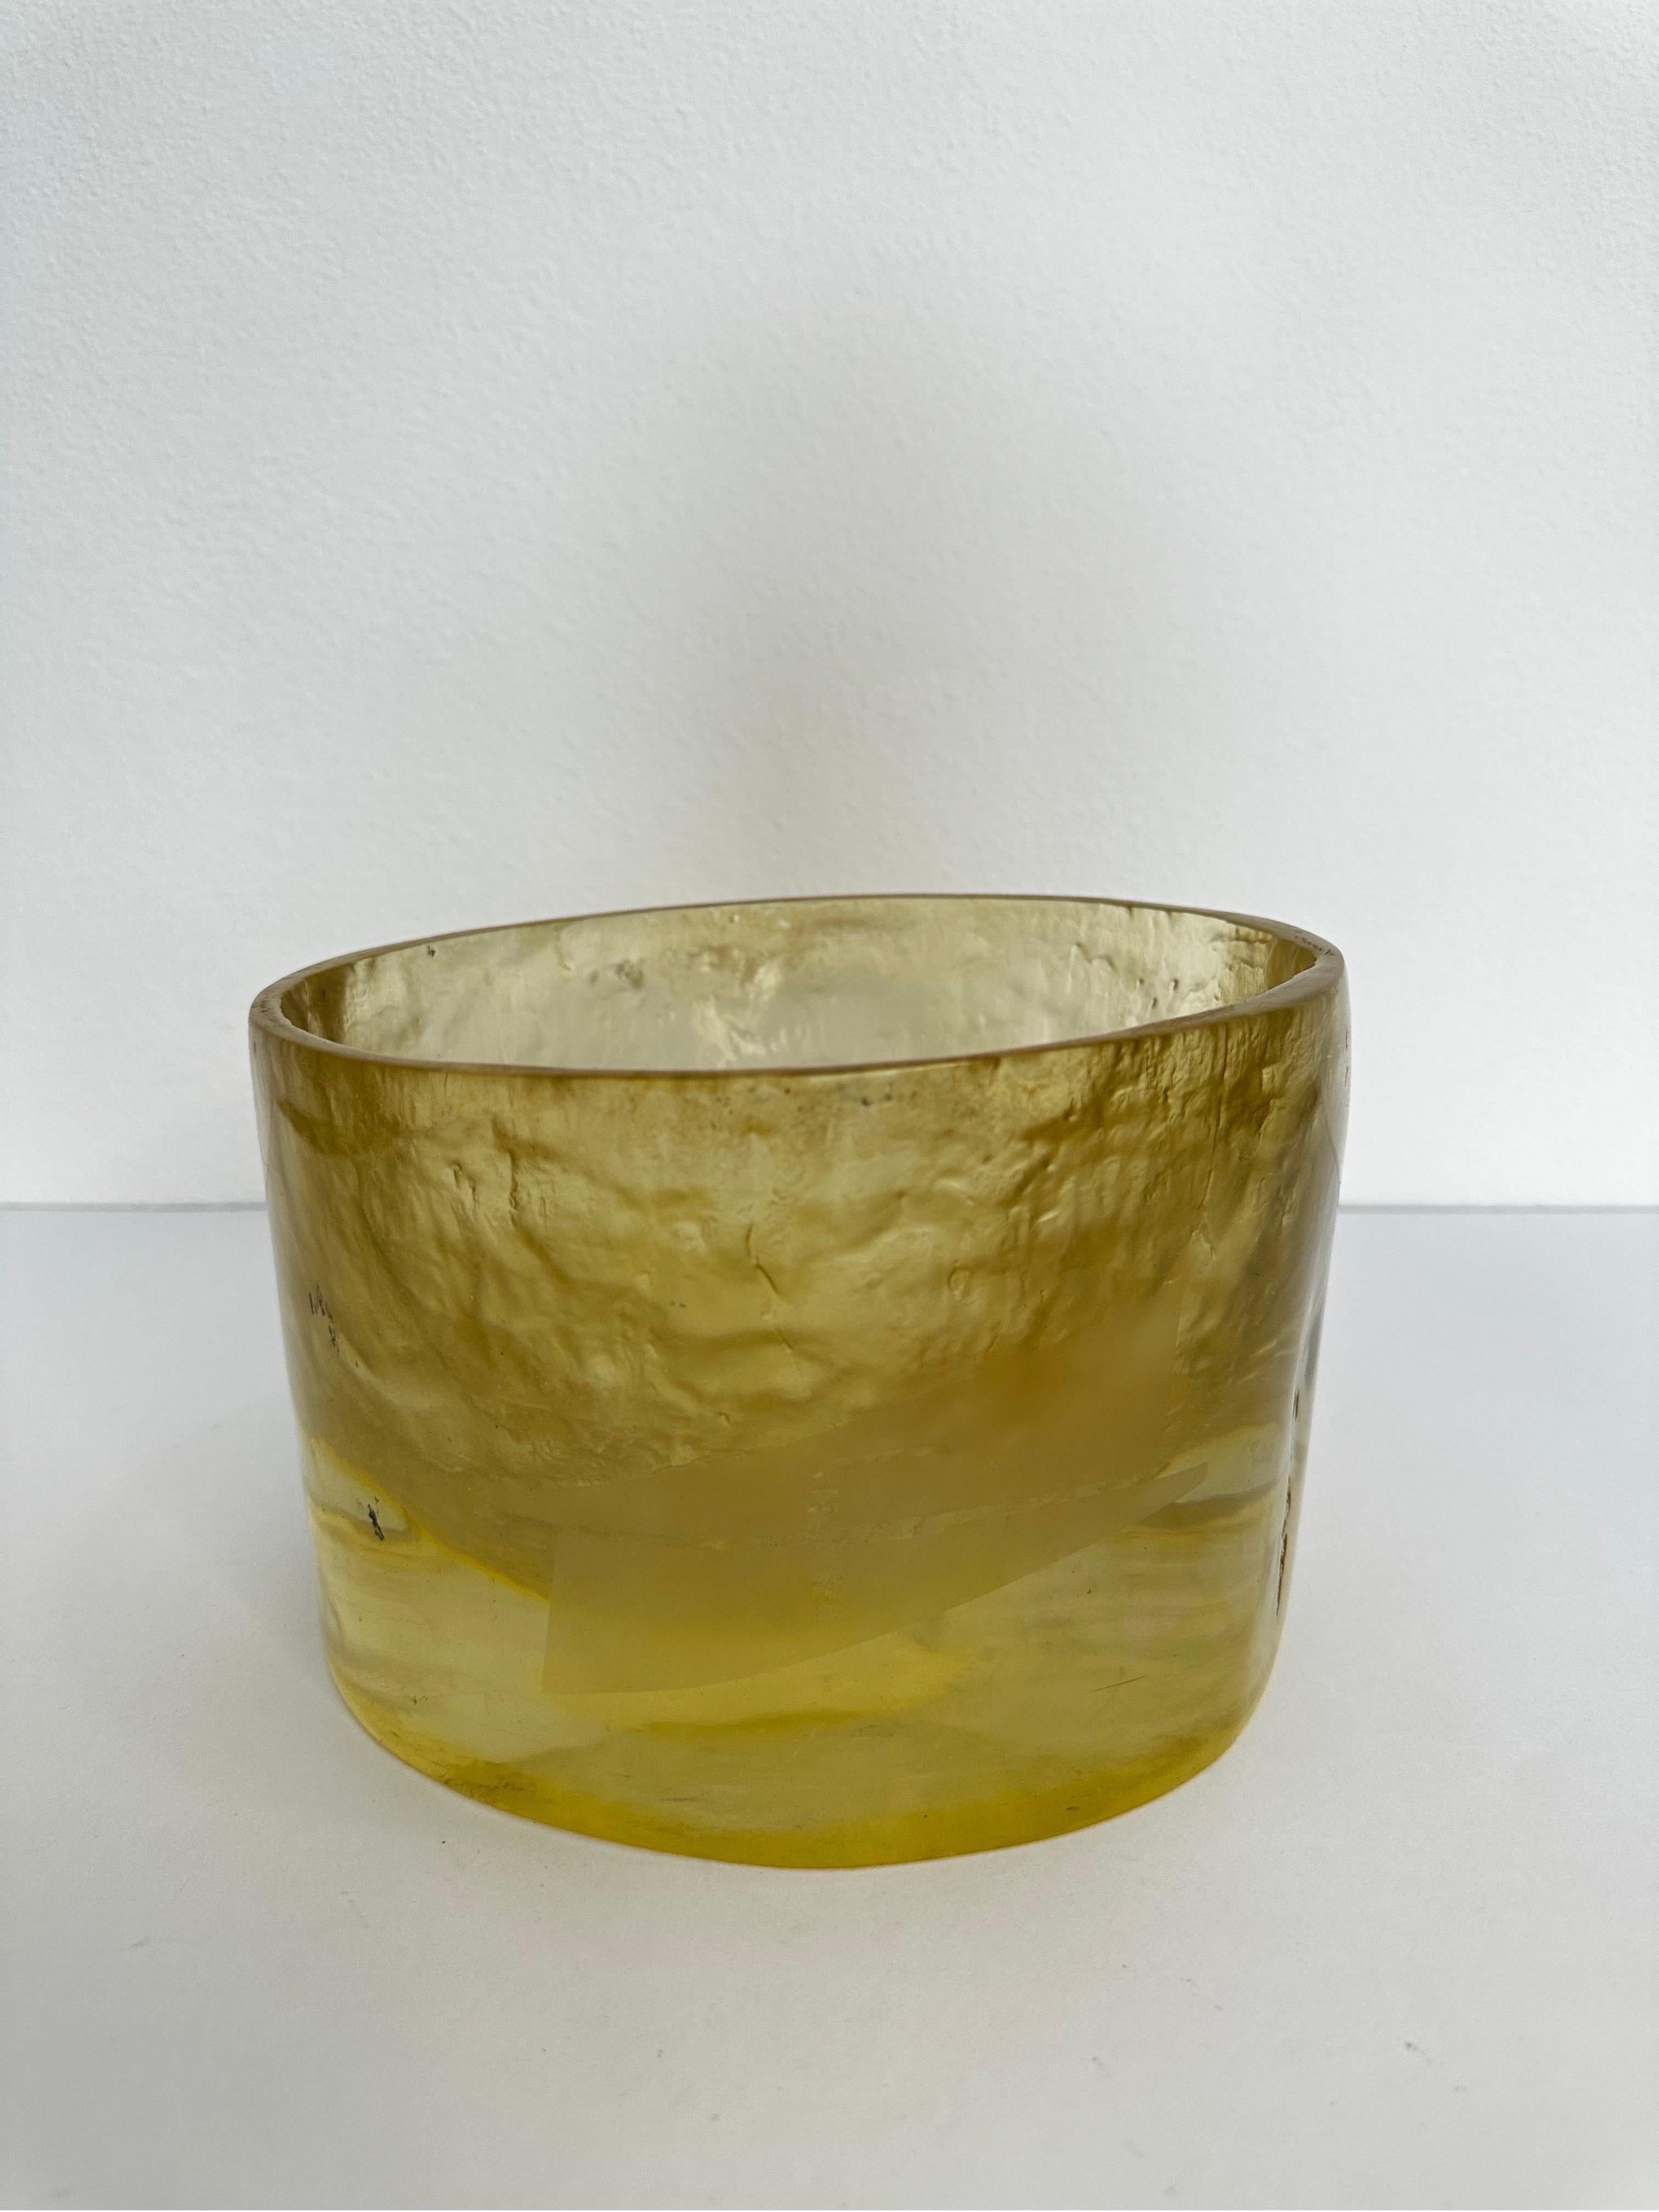 Brazilian modern sculptural carved resin bowl, 1980s.  Signed by artist with detailing on the front side.